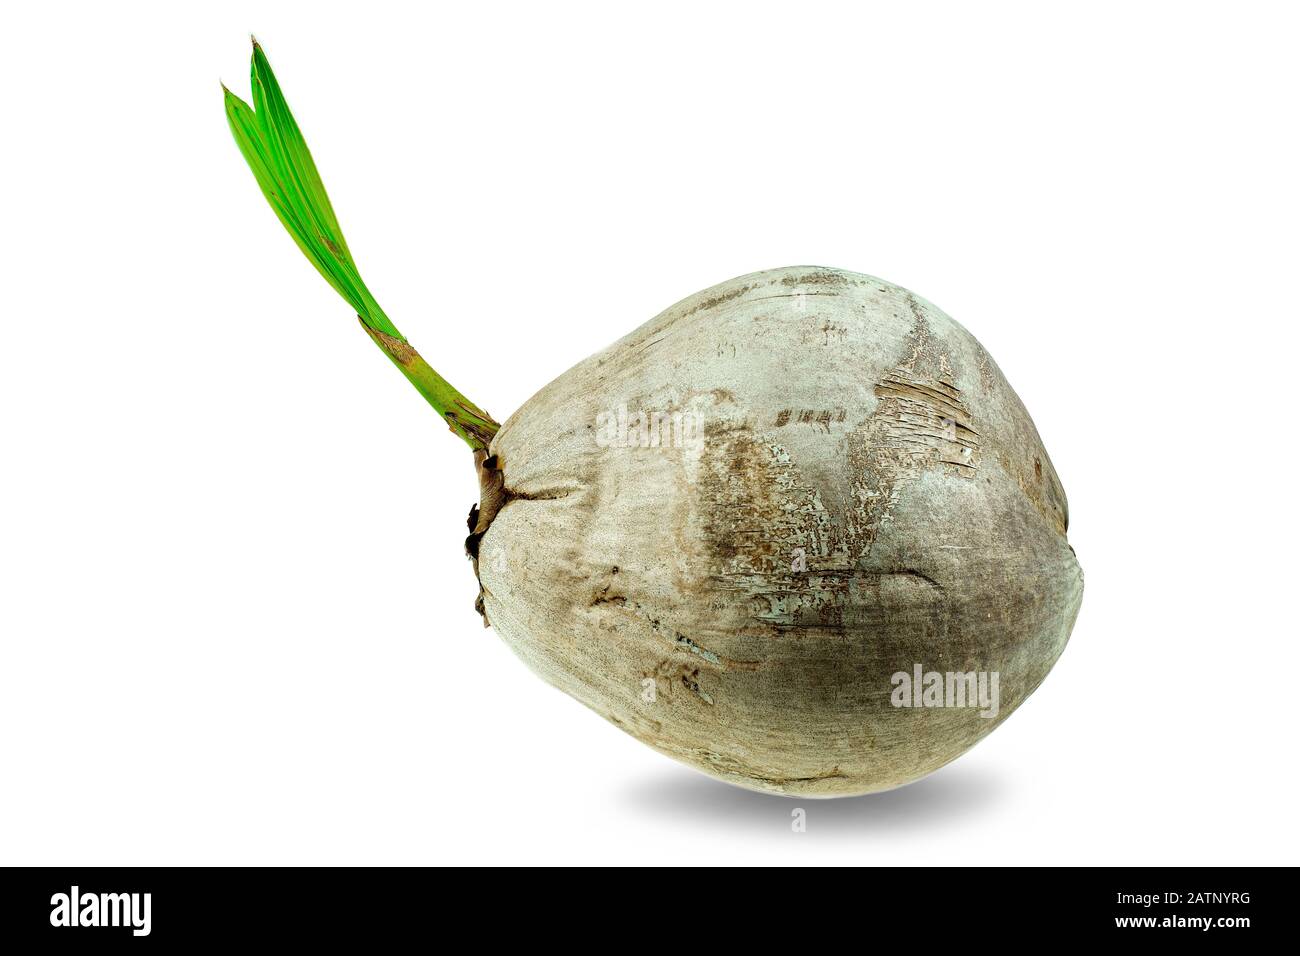 Young sprout of coconut tree grown up at the white background, Seedlings are growing Stock Photo